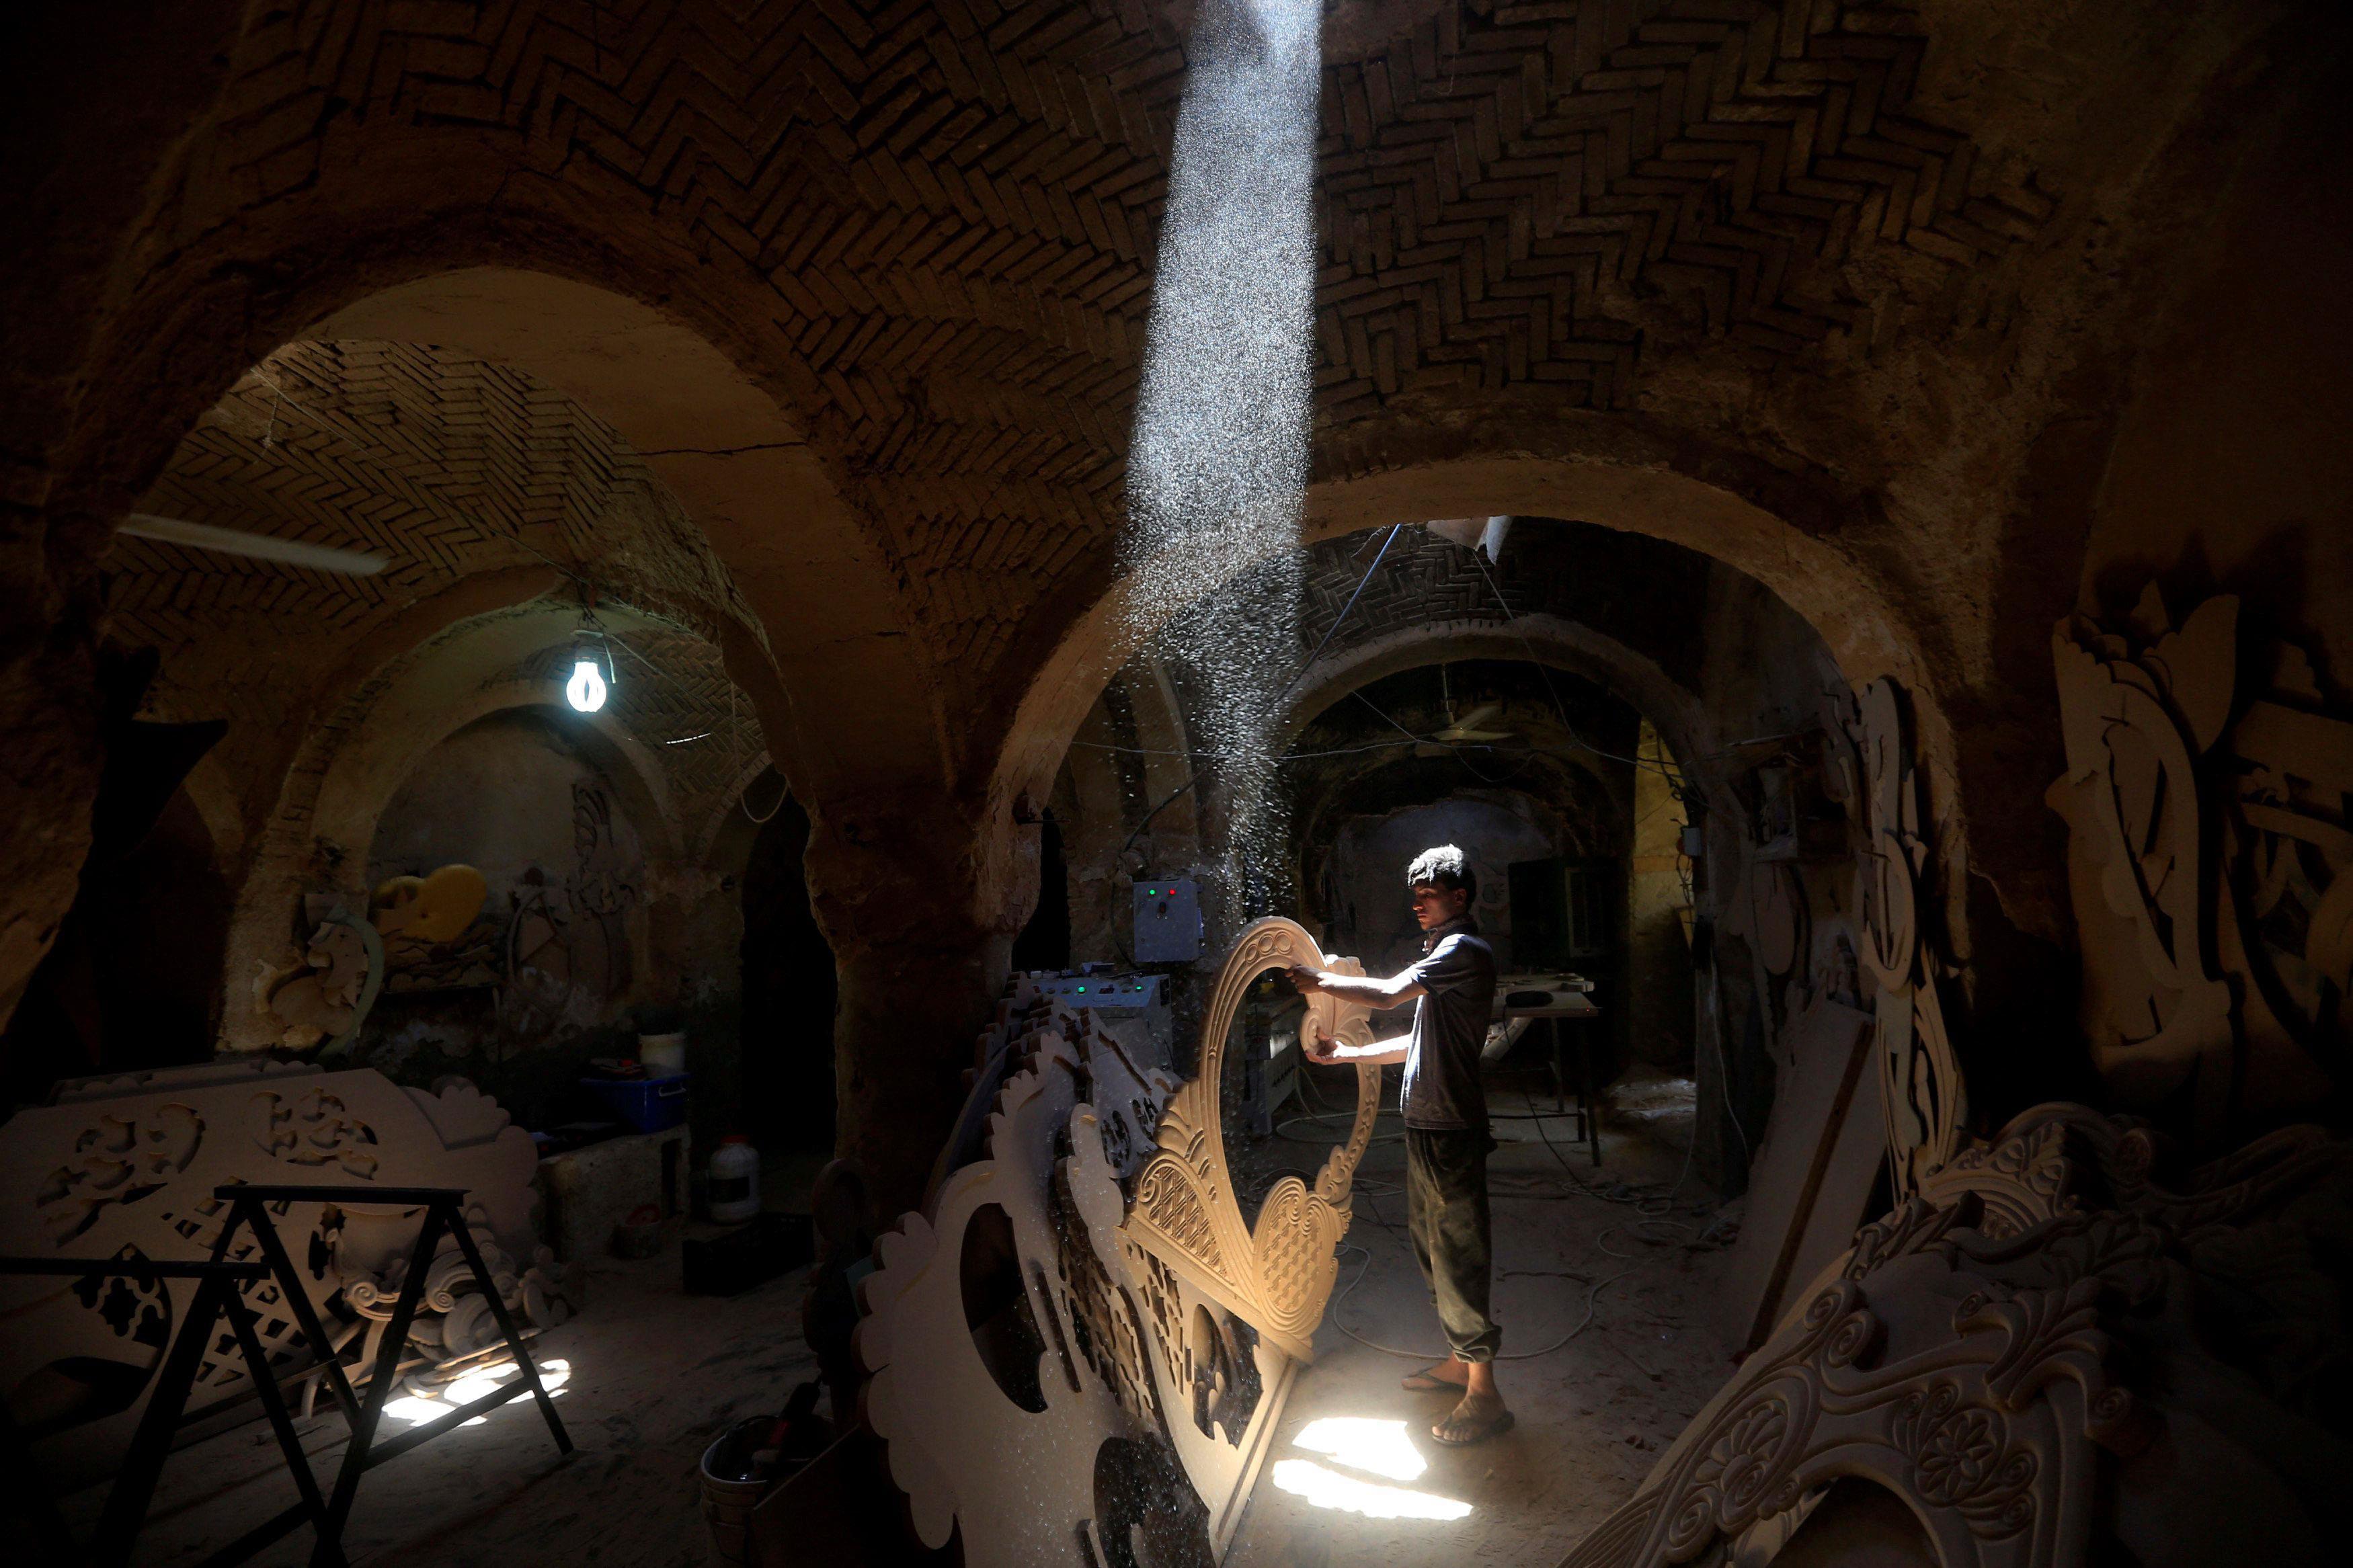 An Iraqi man builds a traditional boat in Najaf